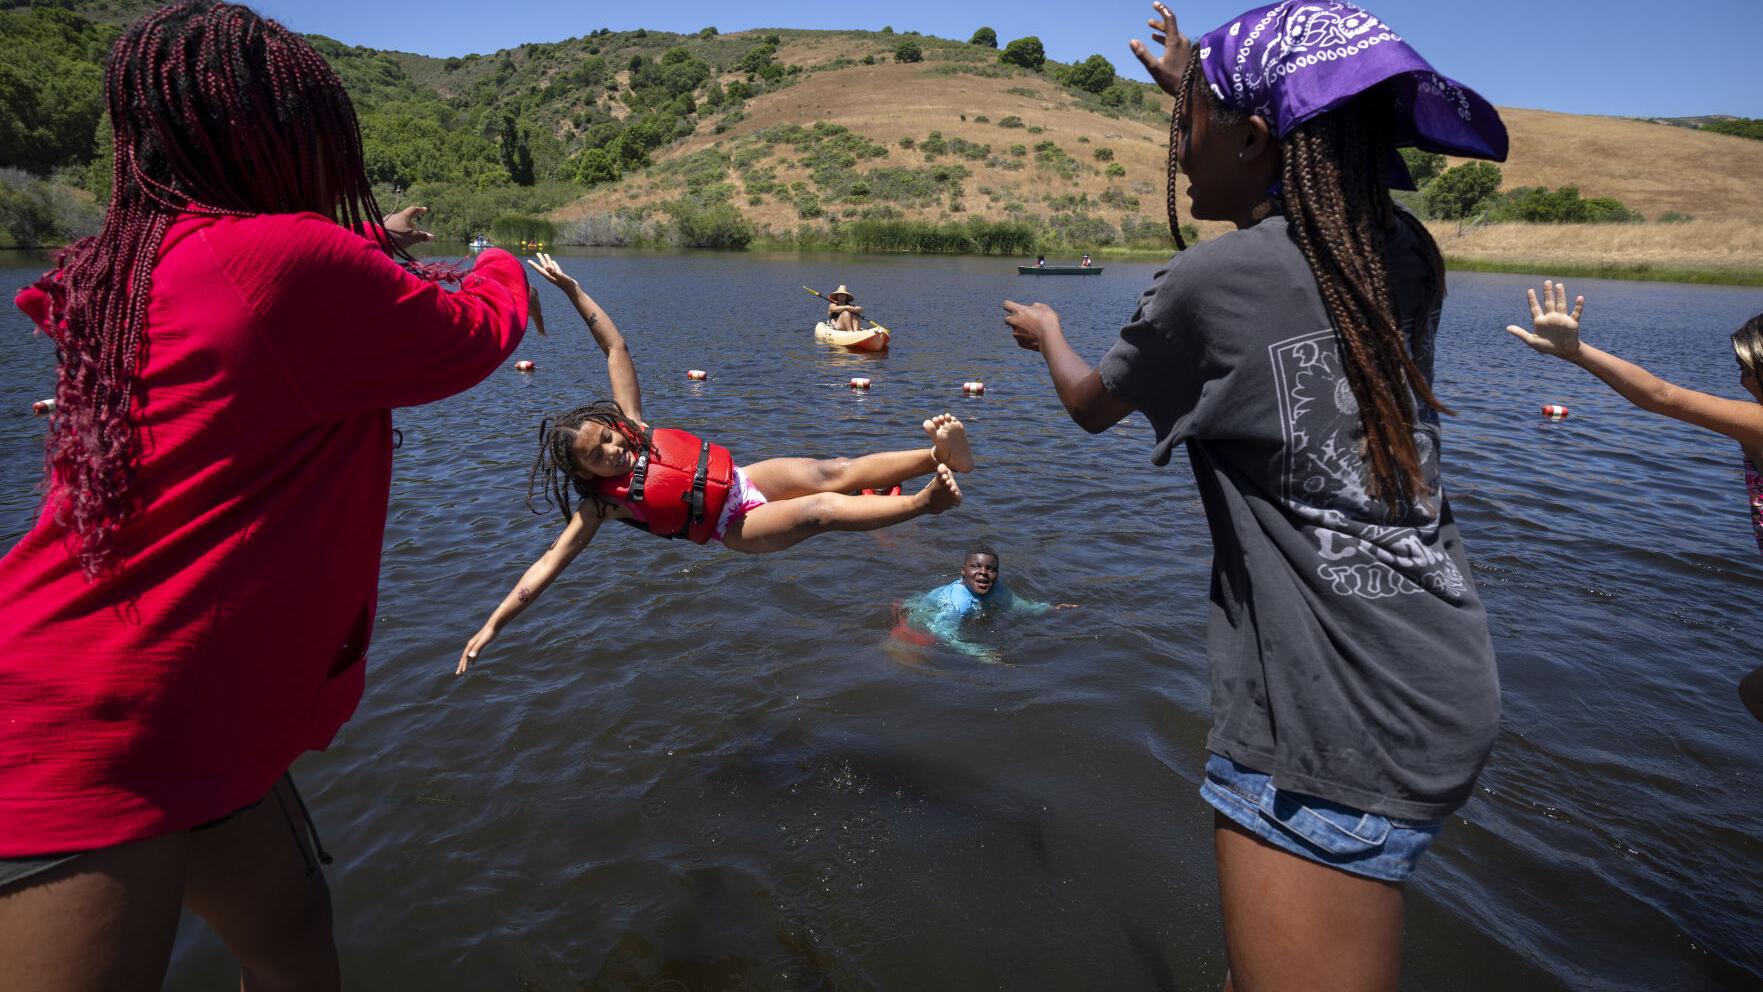 Summer camp for Jewish children of color ‘a place where everybody belongs’